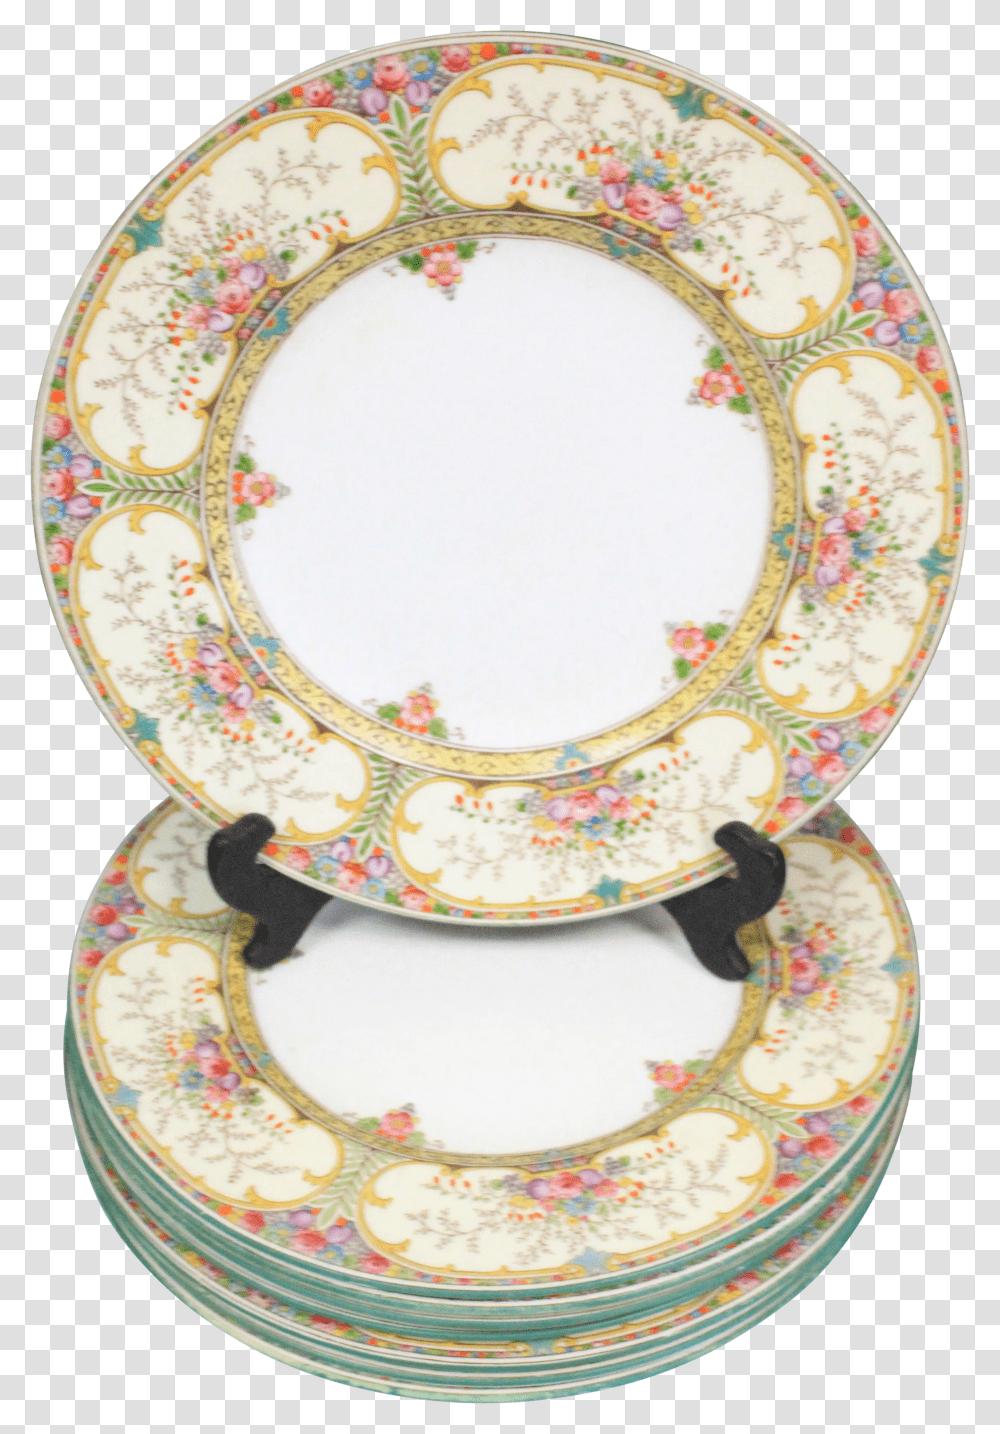 Image Of All Jewelry Amp Accessories Saucer Transparent Png